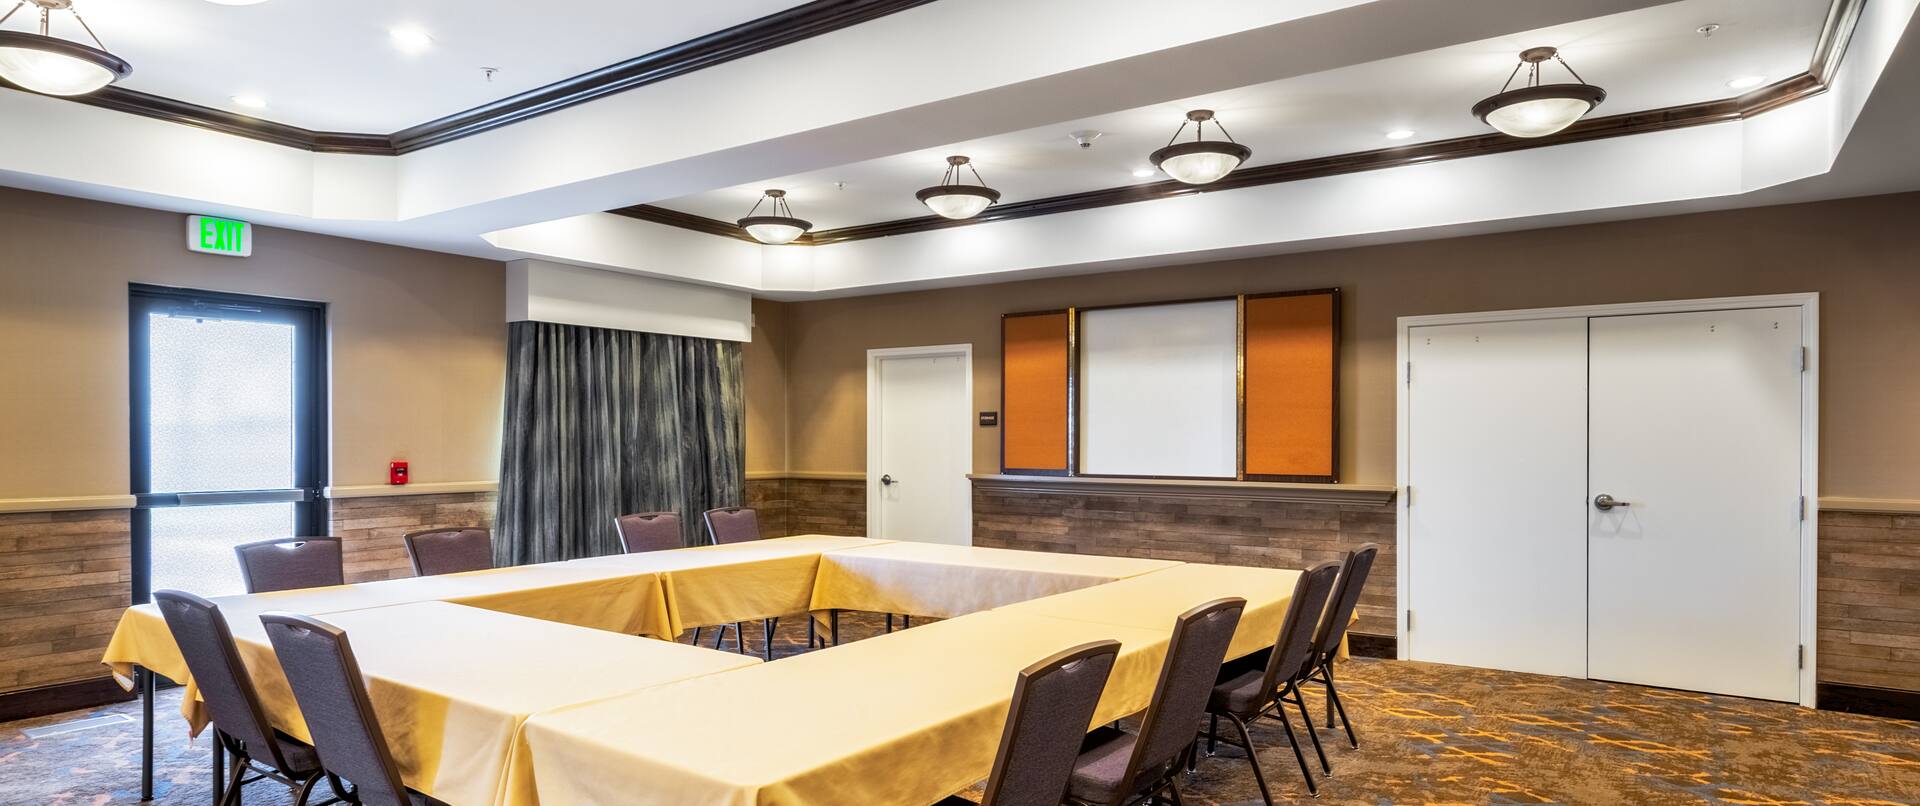 Meeting Room With Whiteboard and Seating for 10 at Hollow Square Table 